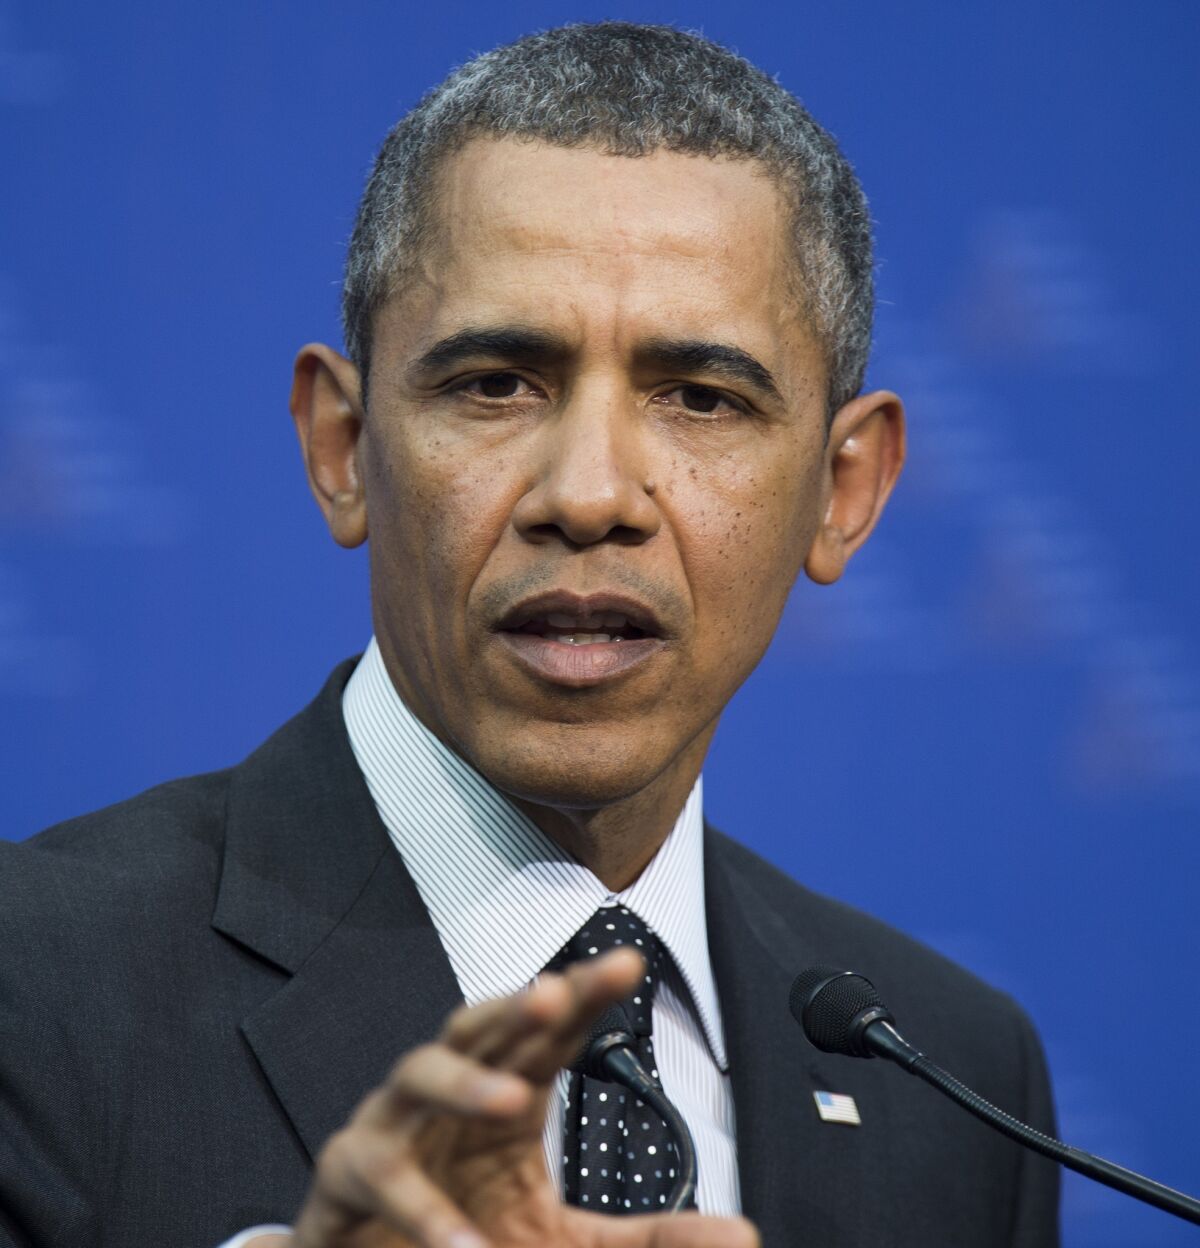 President Obama during a news conference in The Hague, Netherlands.